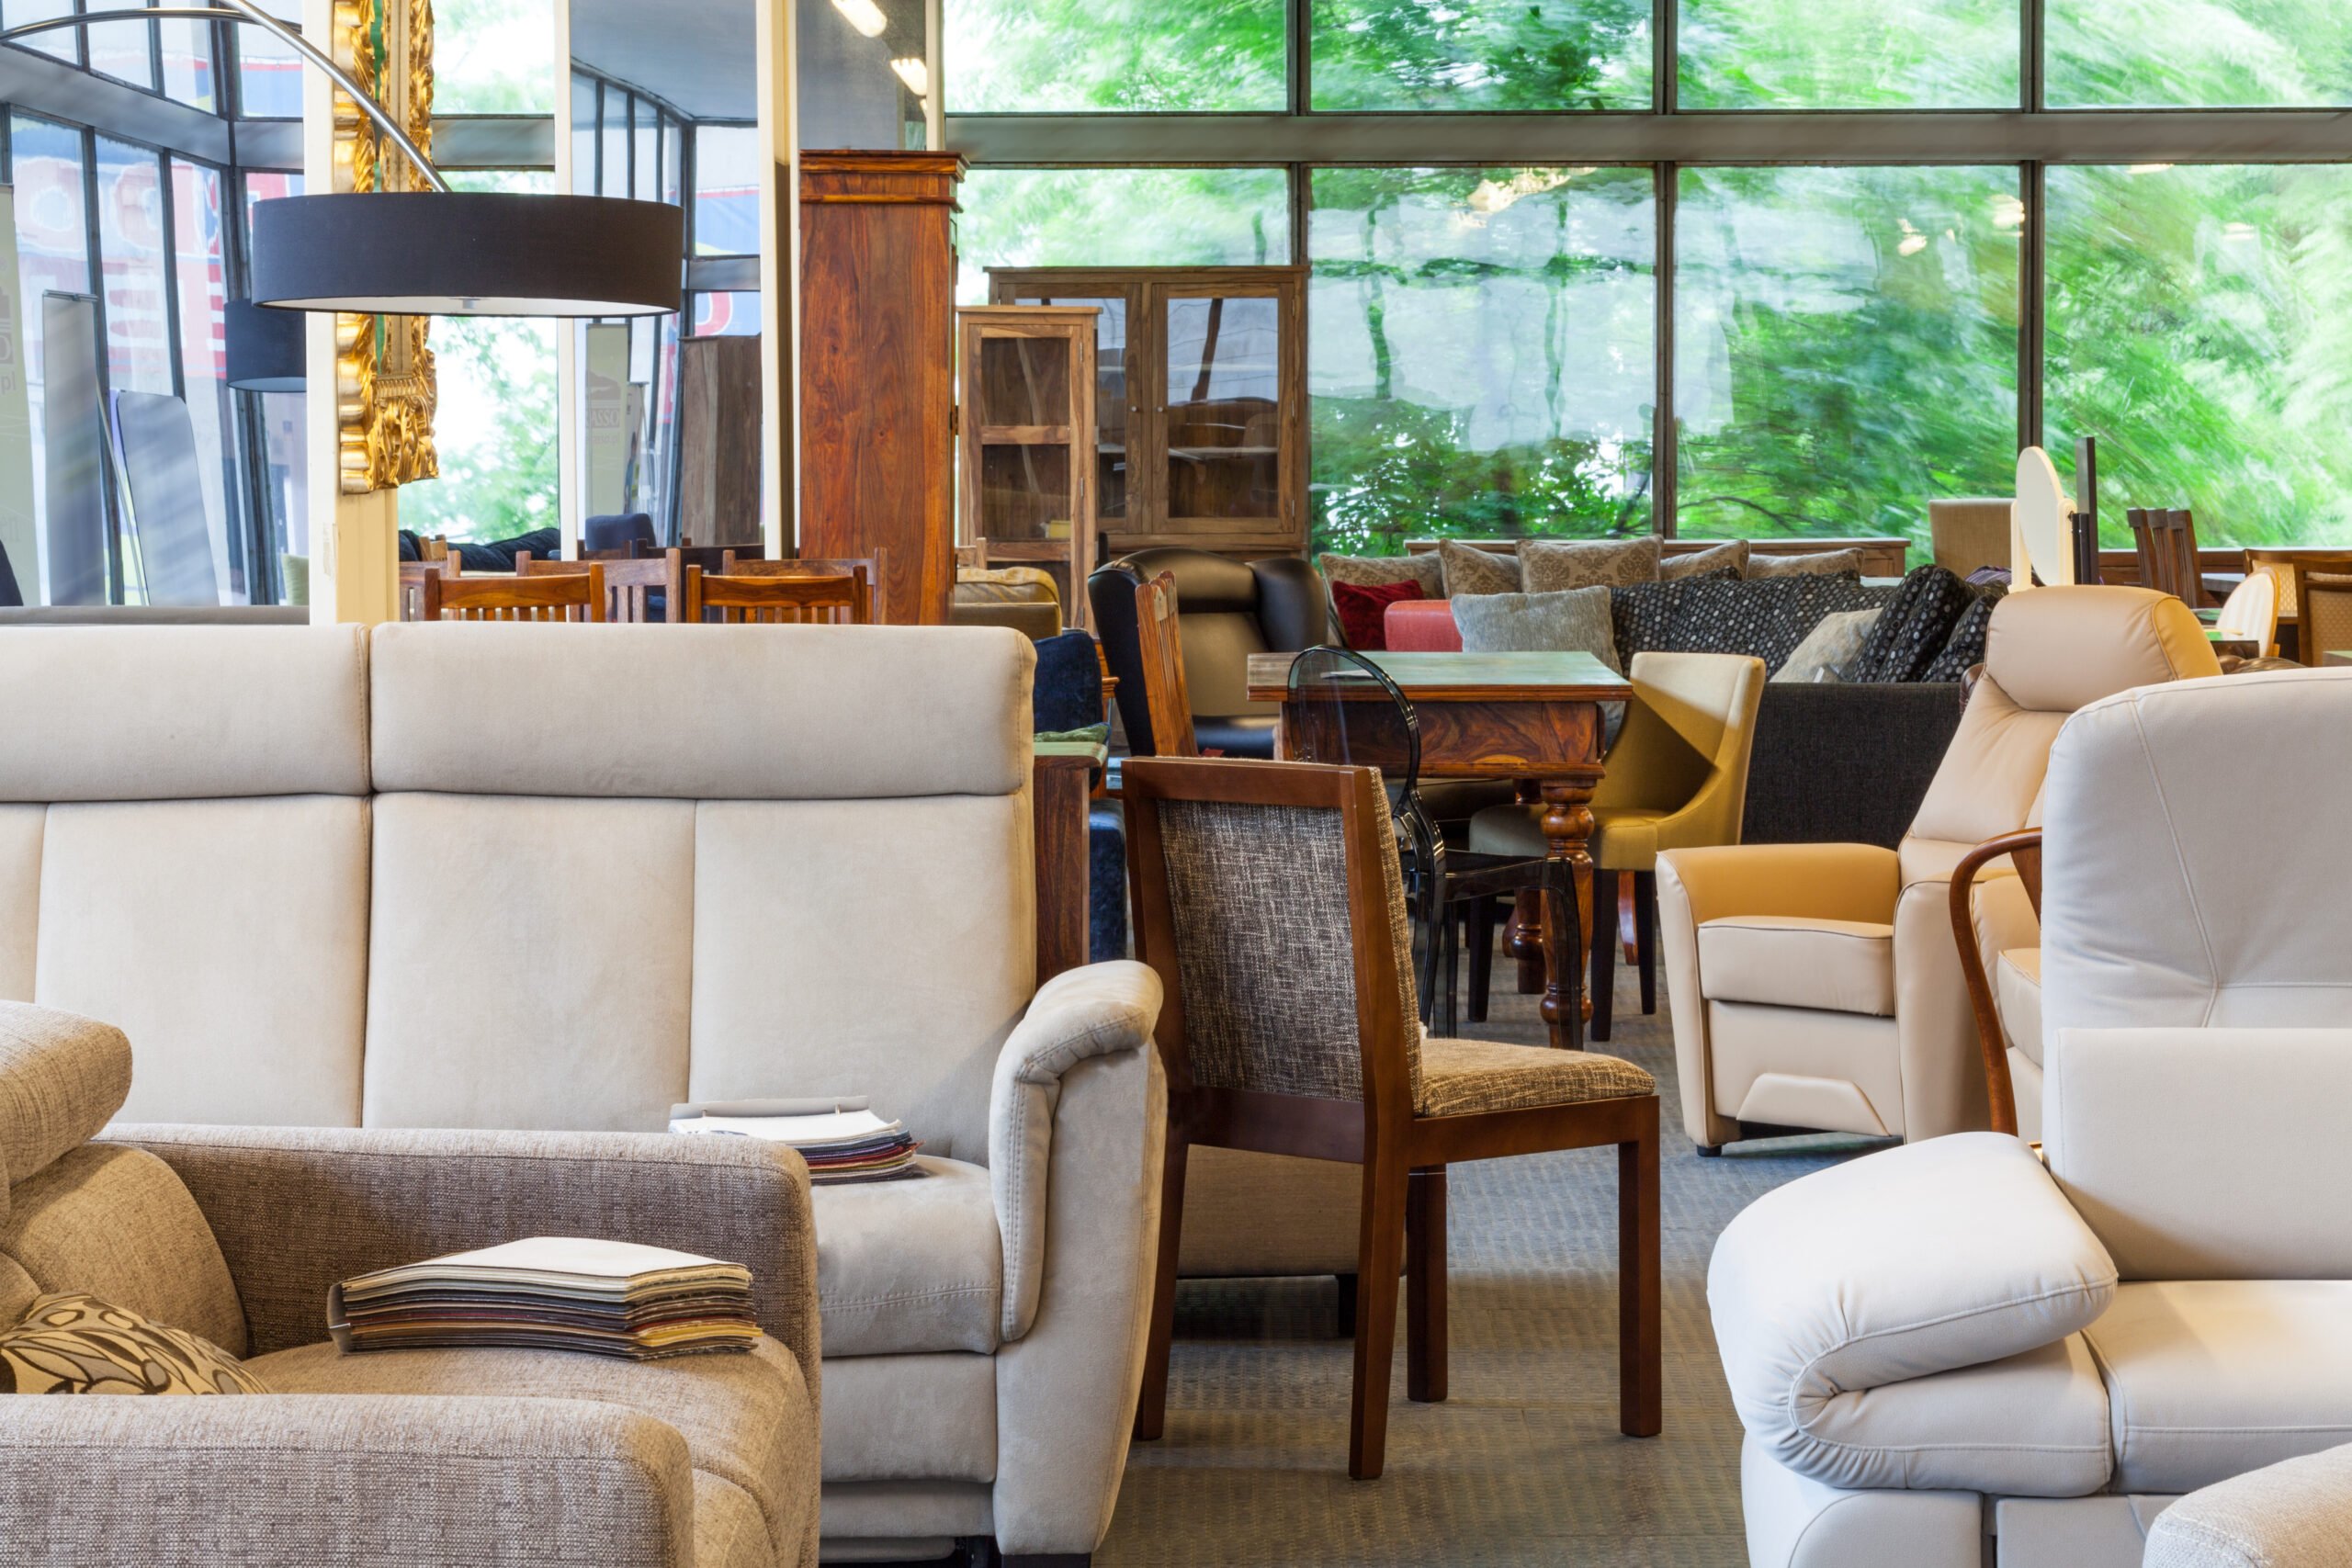 Discover the Best Used Furniture Stores in Dallas, Texas